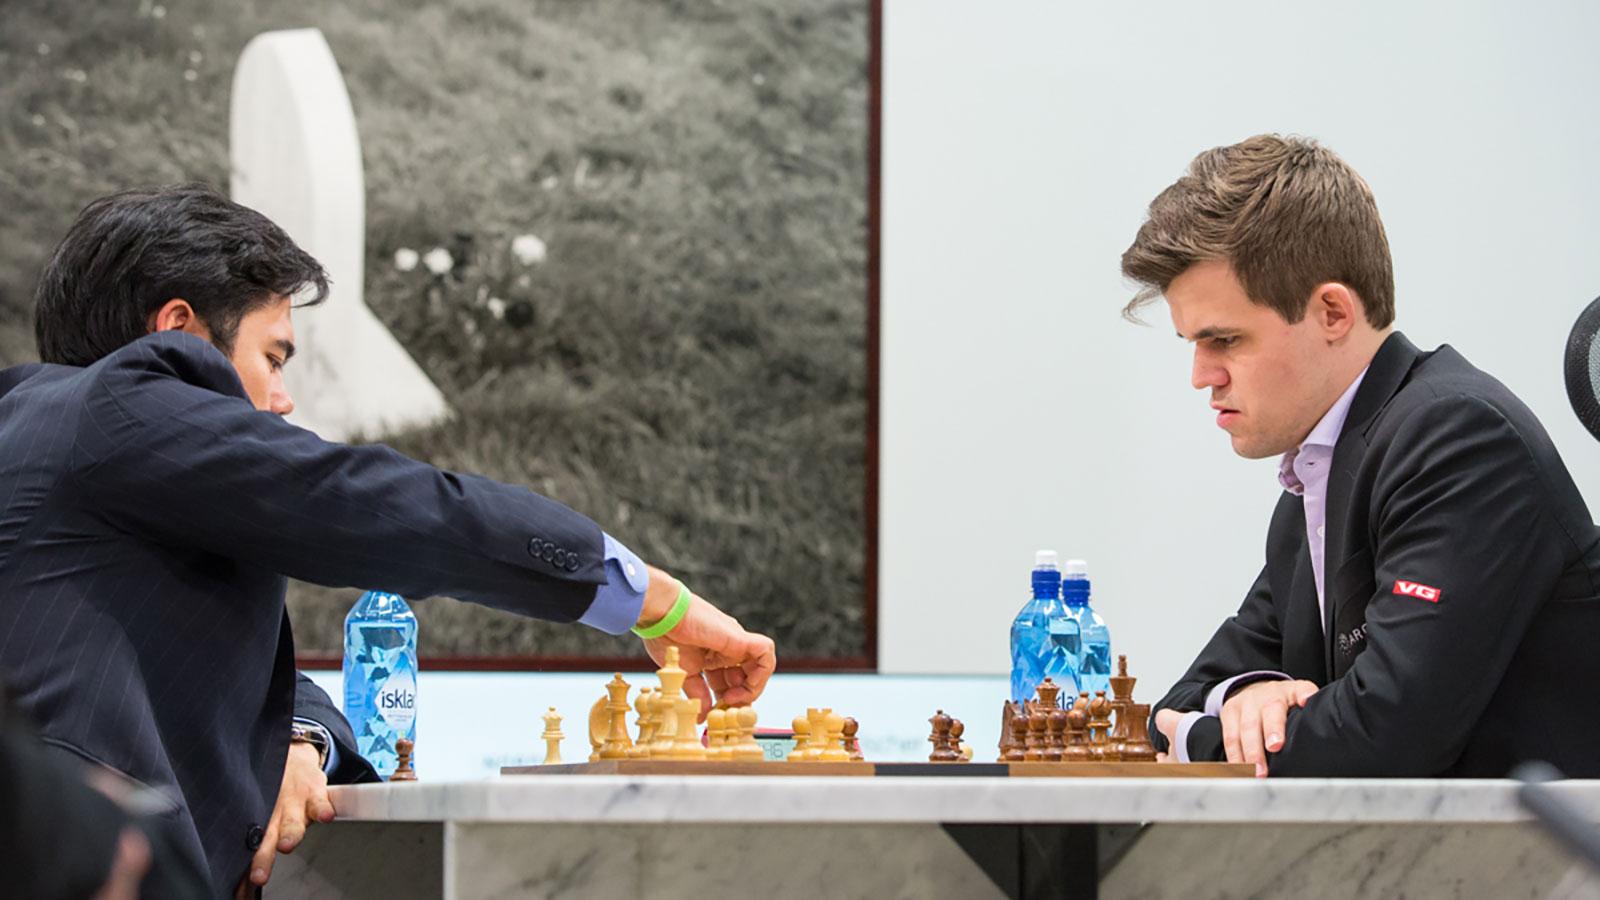 Lindores Abbey: Carlsen and Dubov win convincingly